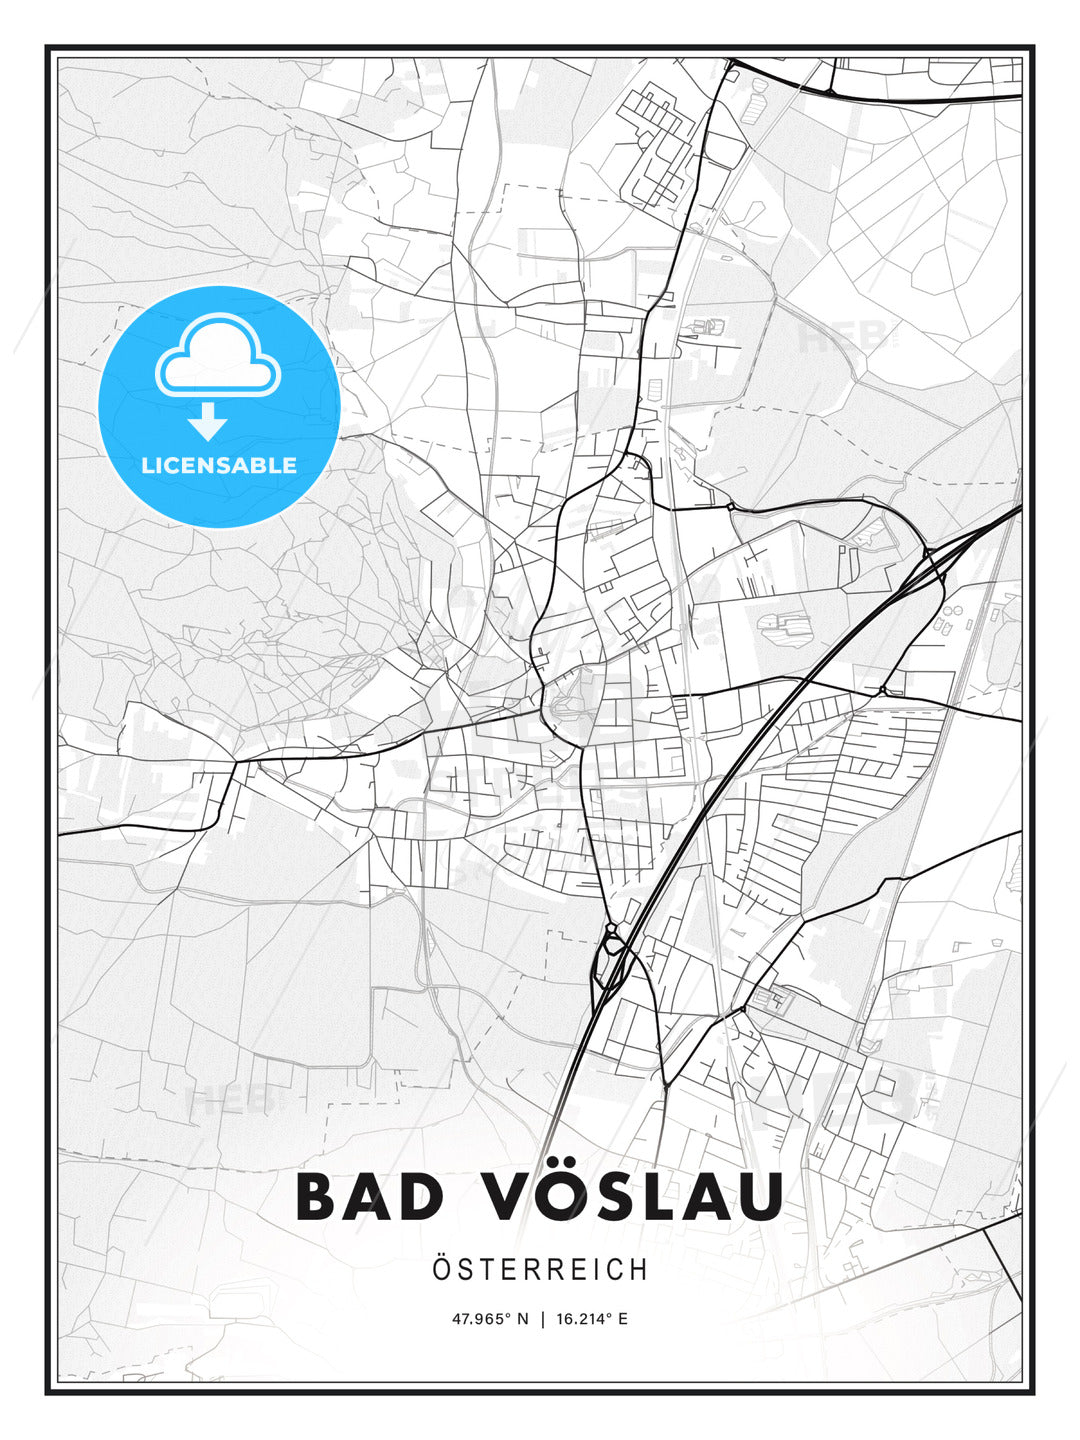 Bad Vöslau, Austria, Modern Print Template in Various Formats - HEBSTREITS Sketches